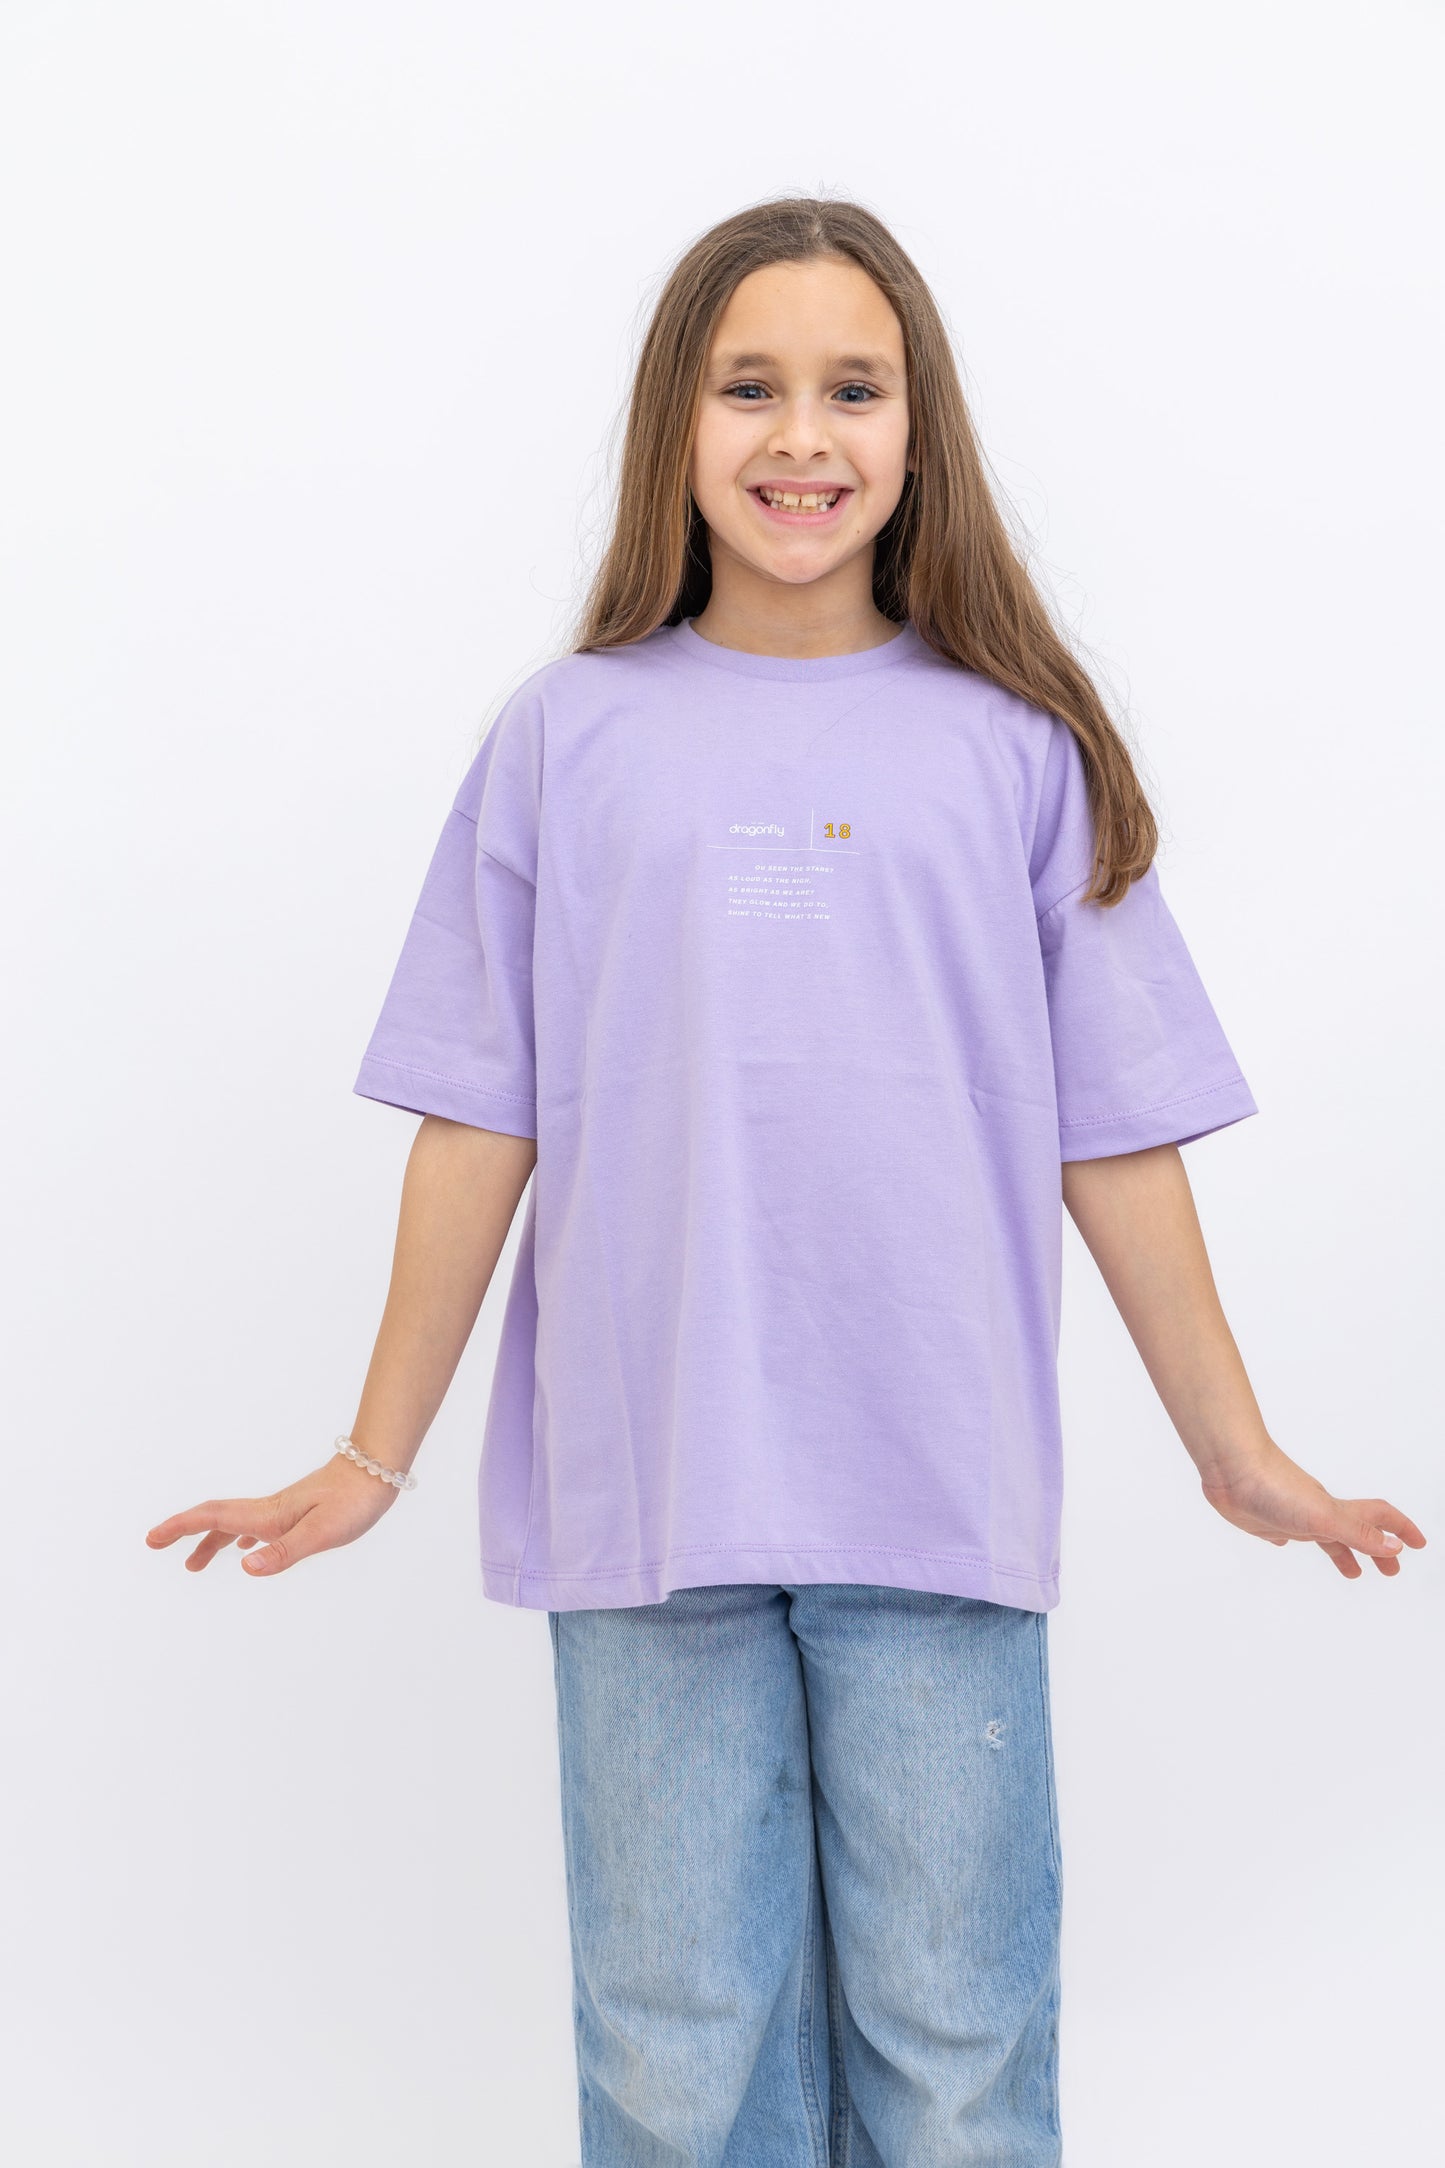 NOW! In Lilac T-Shirt